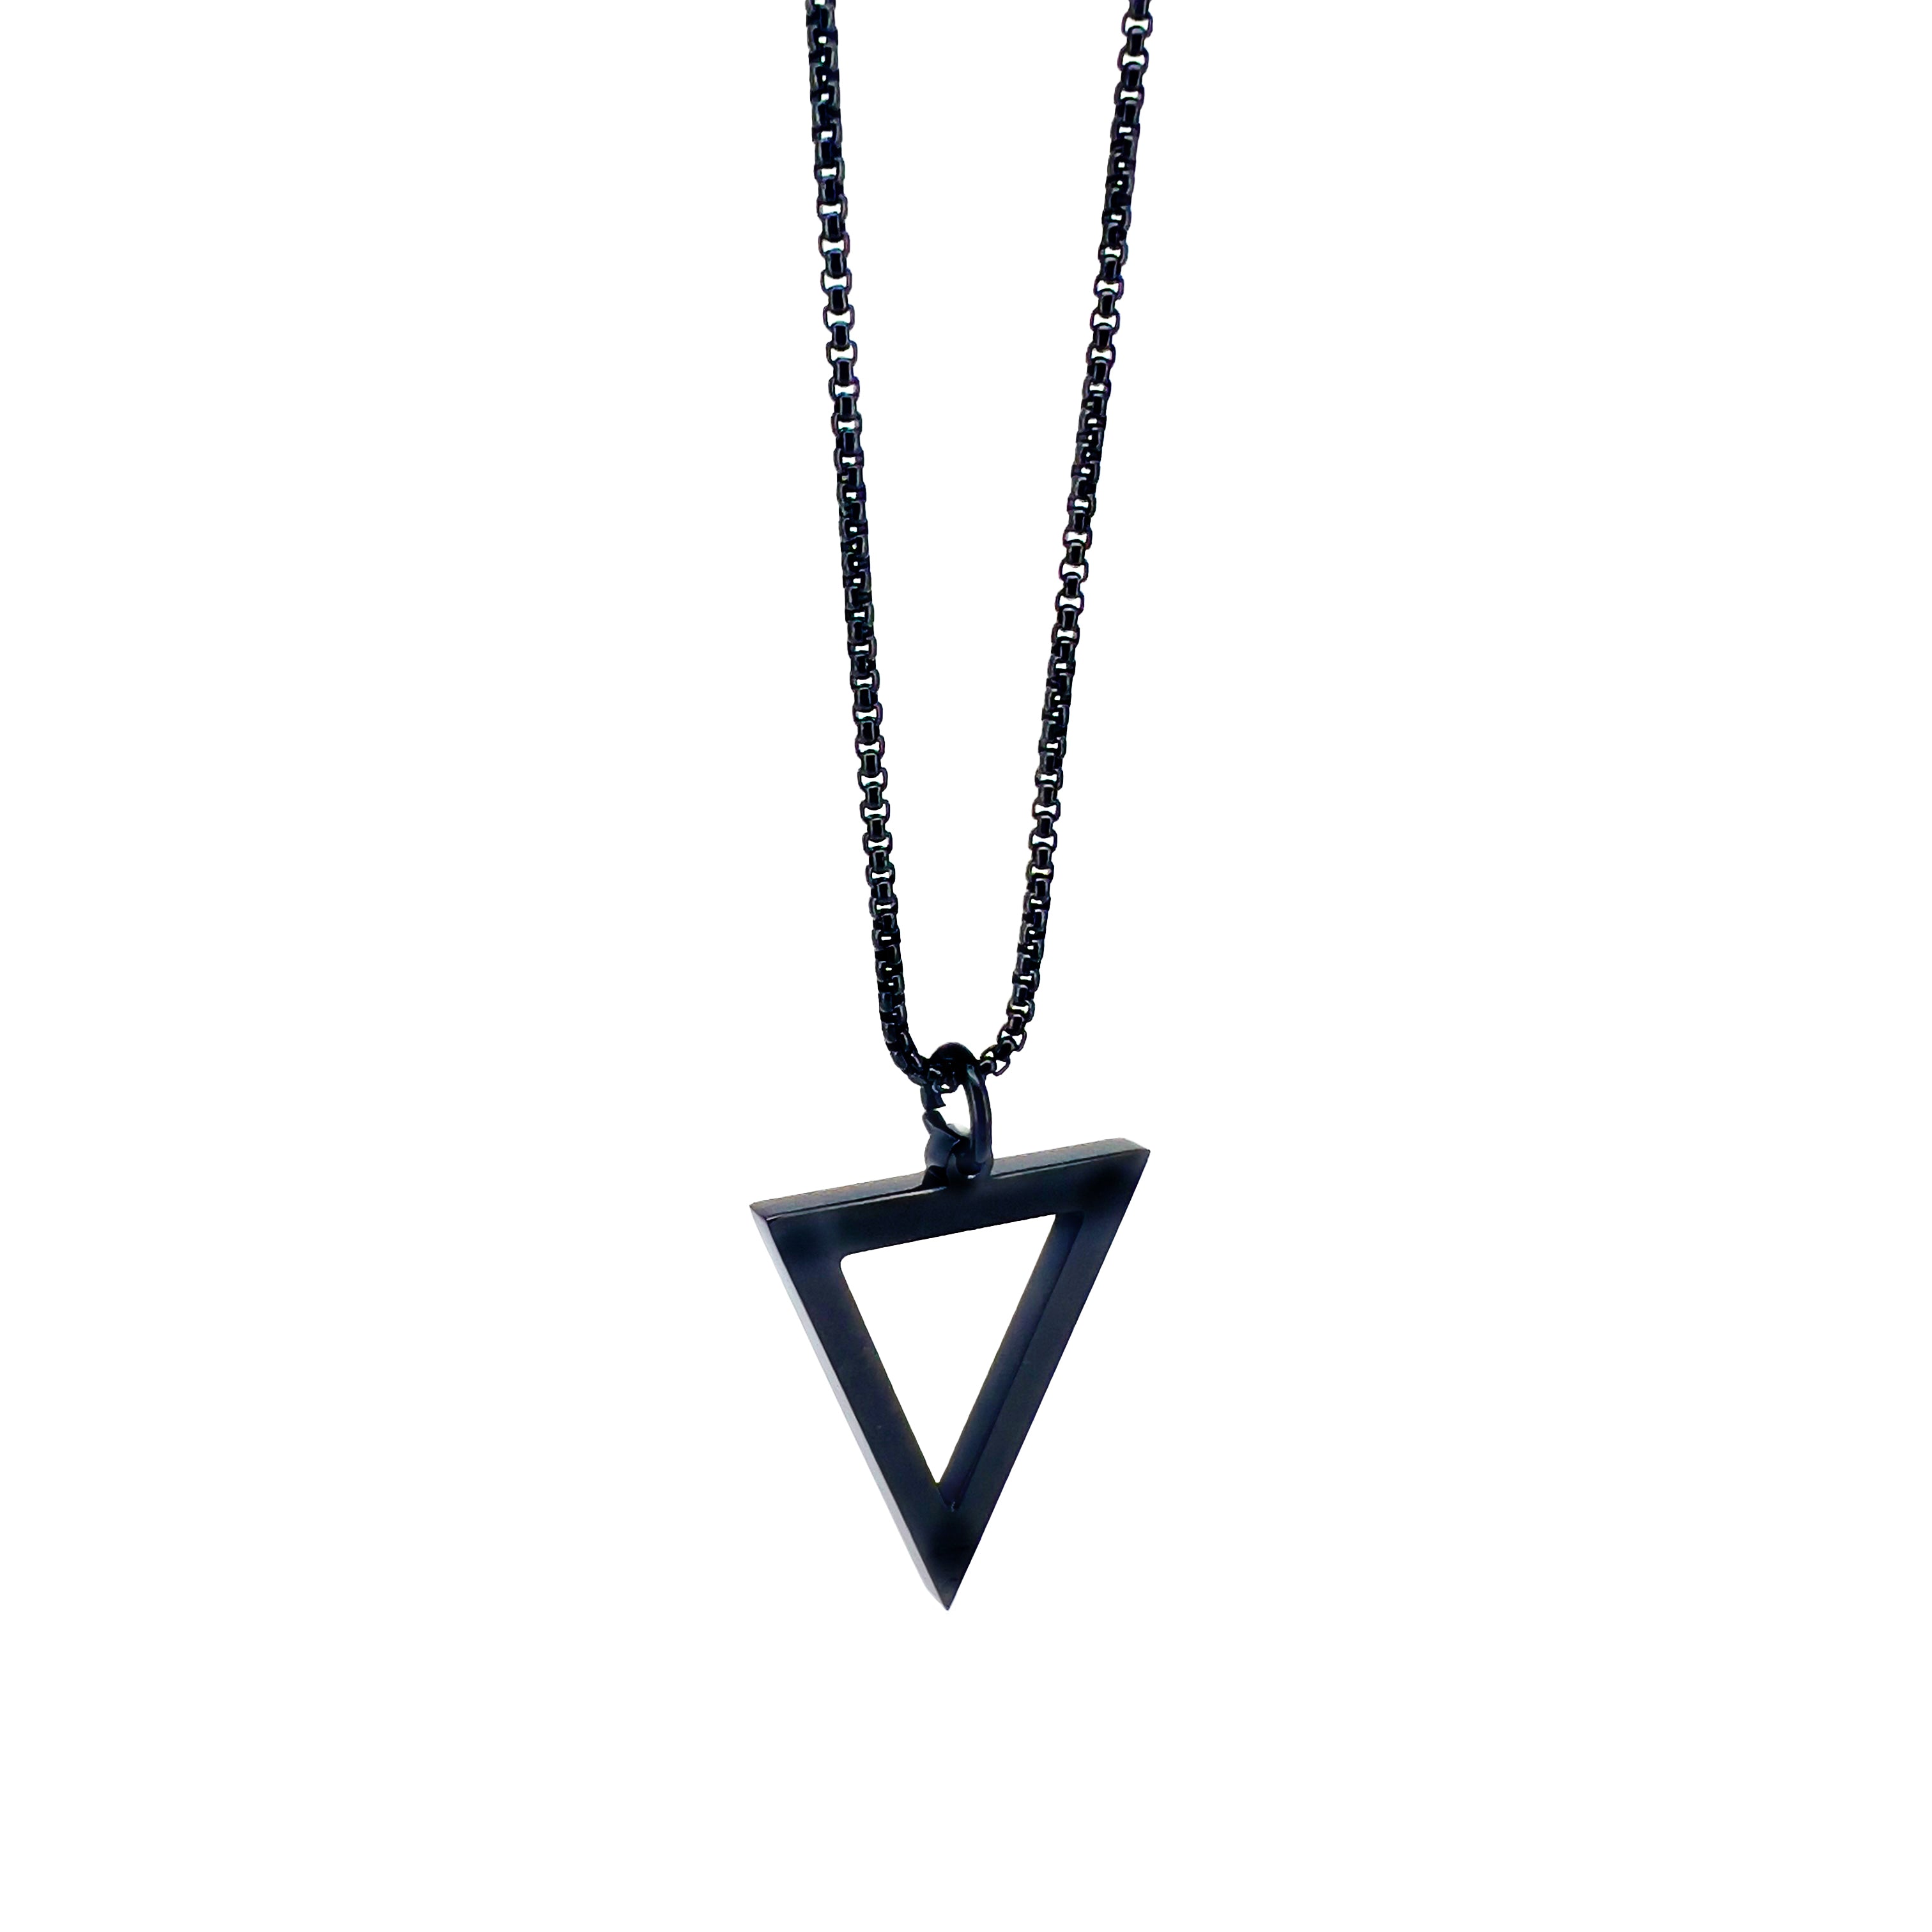 Macklin Stainless Steel Necklace with Triangle Pendant